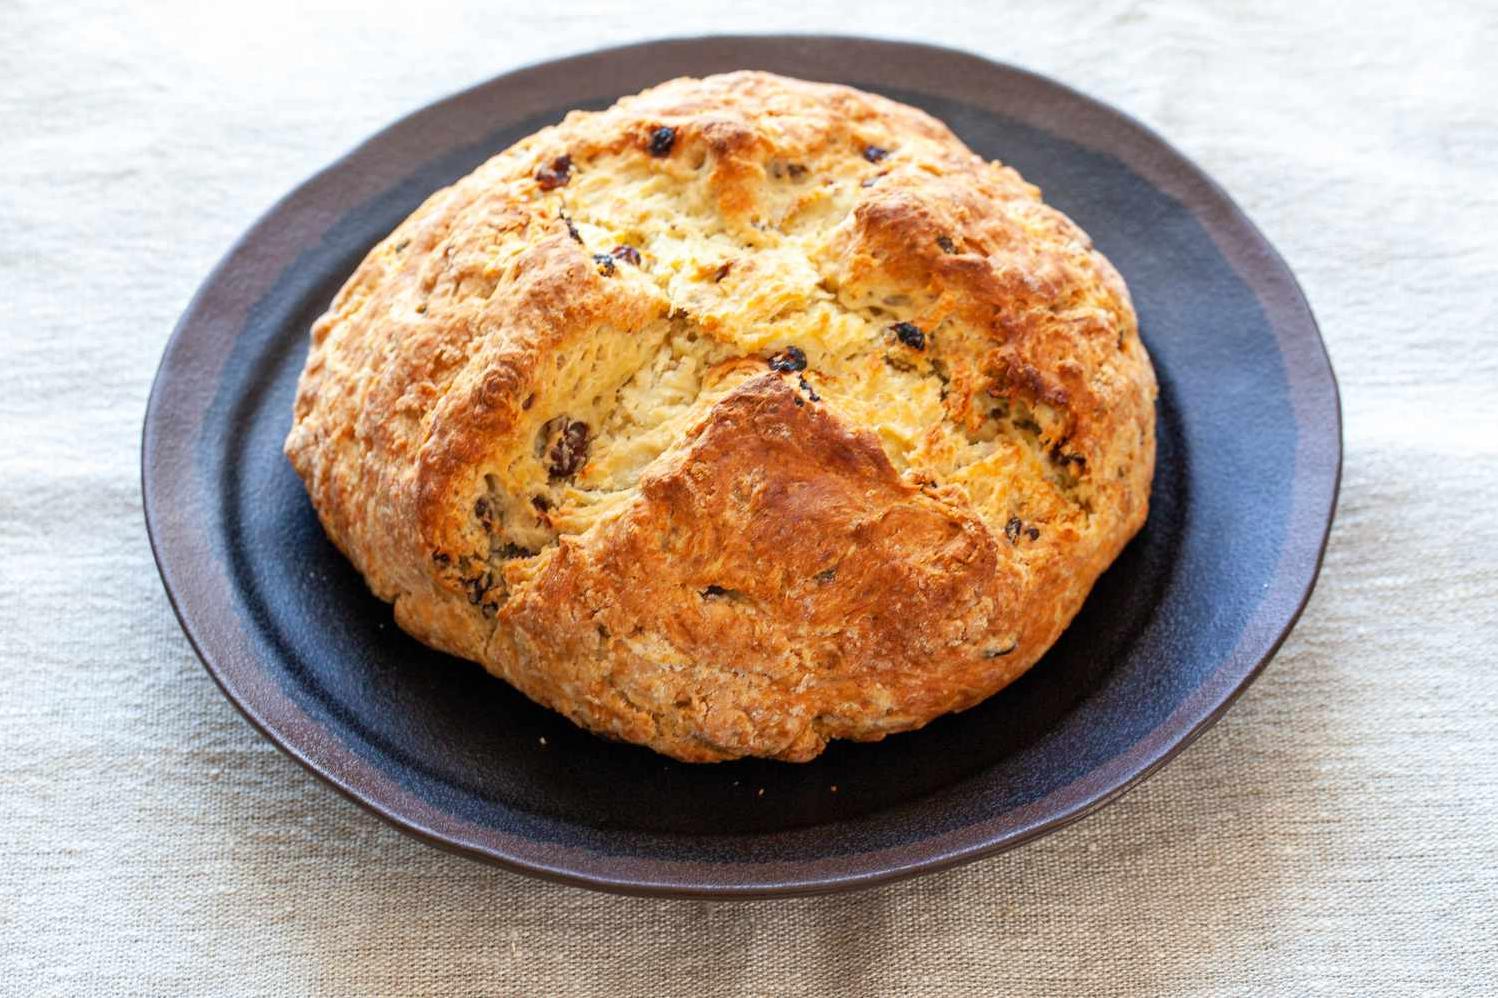  It's a warm, comforting bread that's perfect for a cozy morning in.